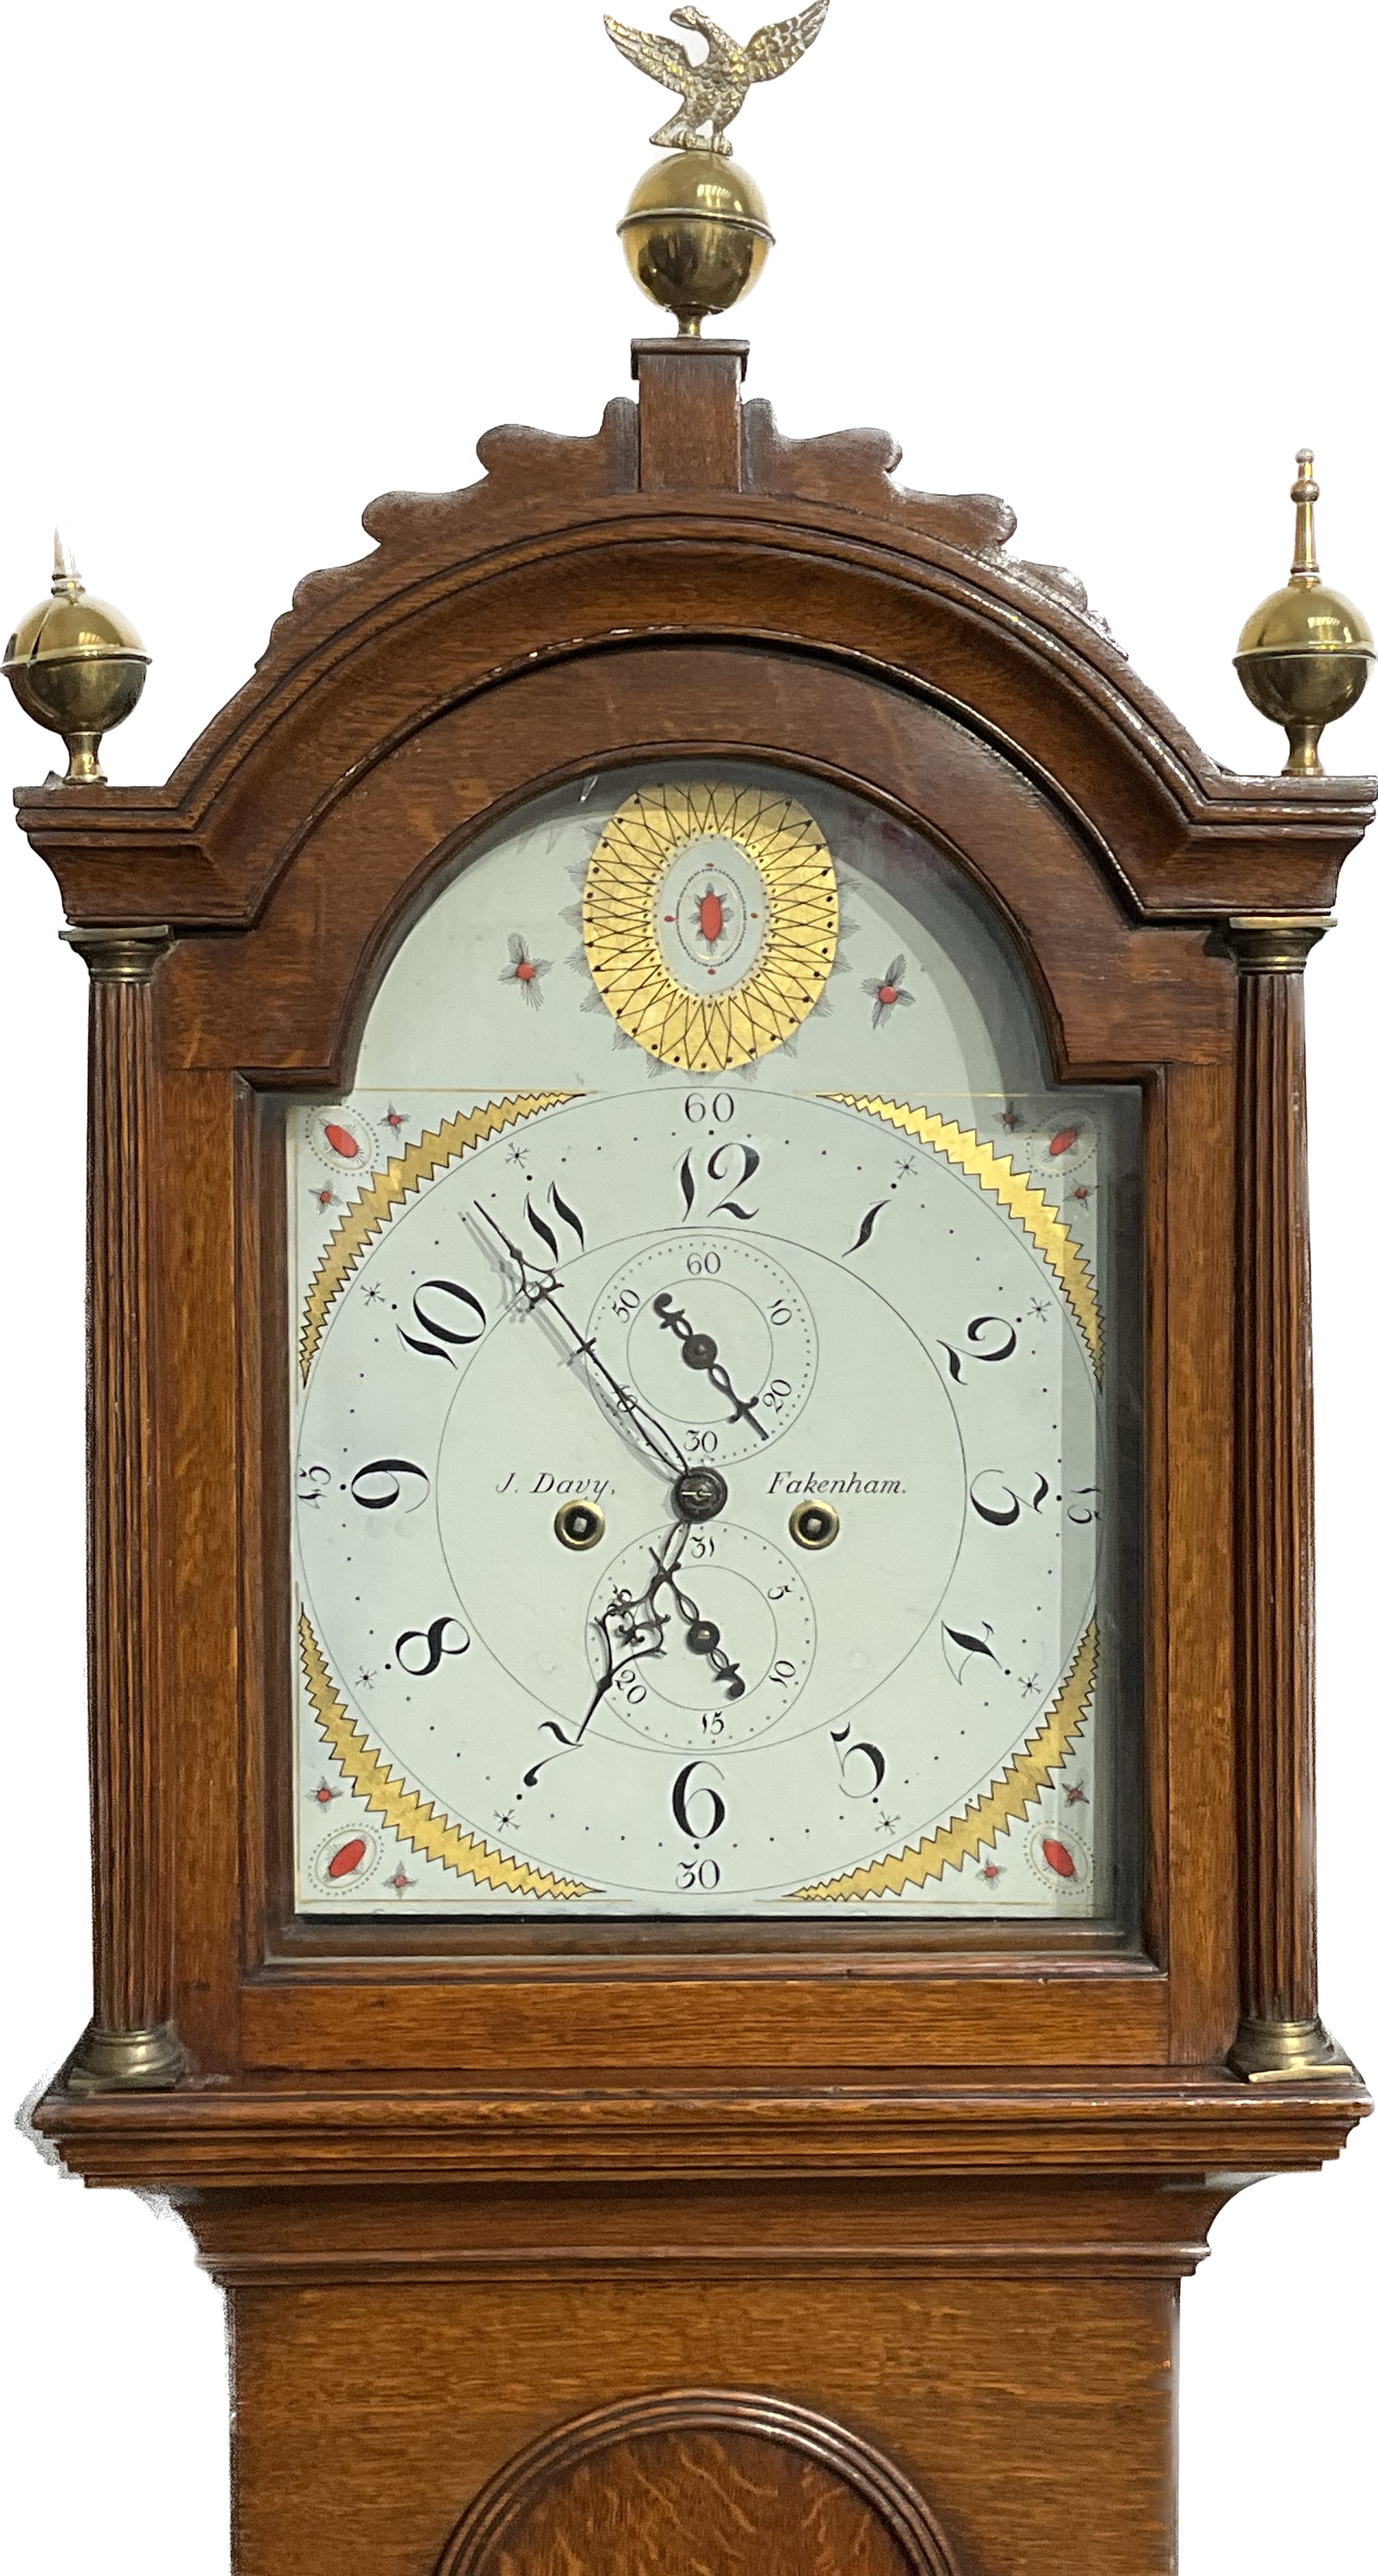 A circa 1800 J. Davy of Fakenham long case clock with subsidiary seconds and calendar dial, in oak